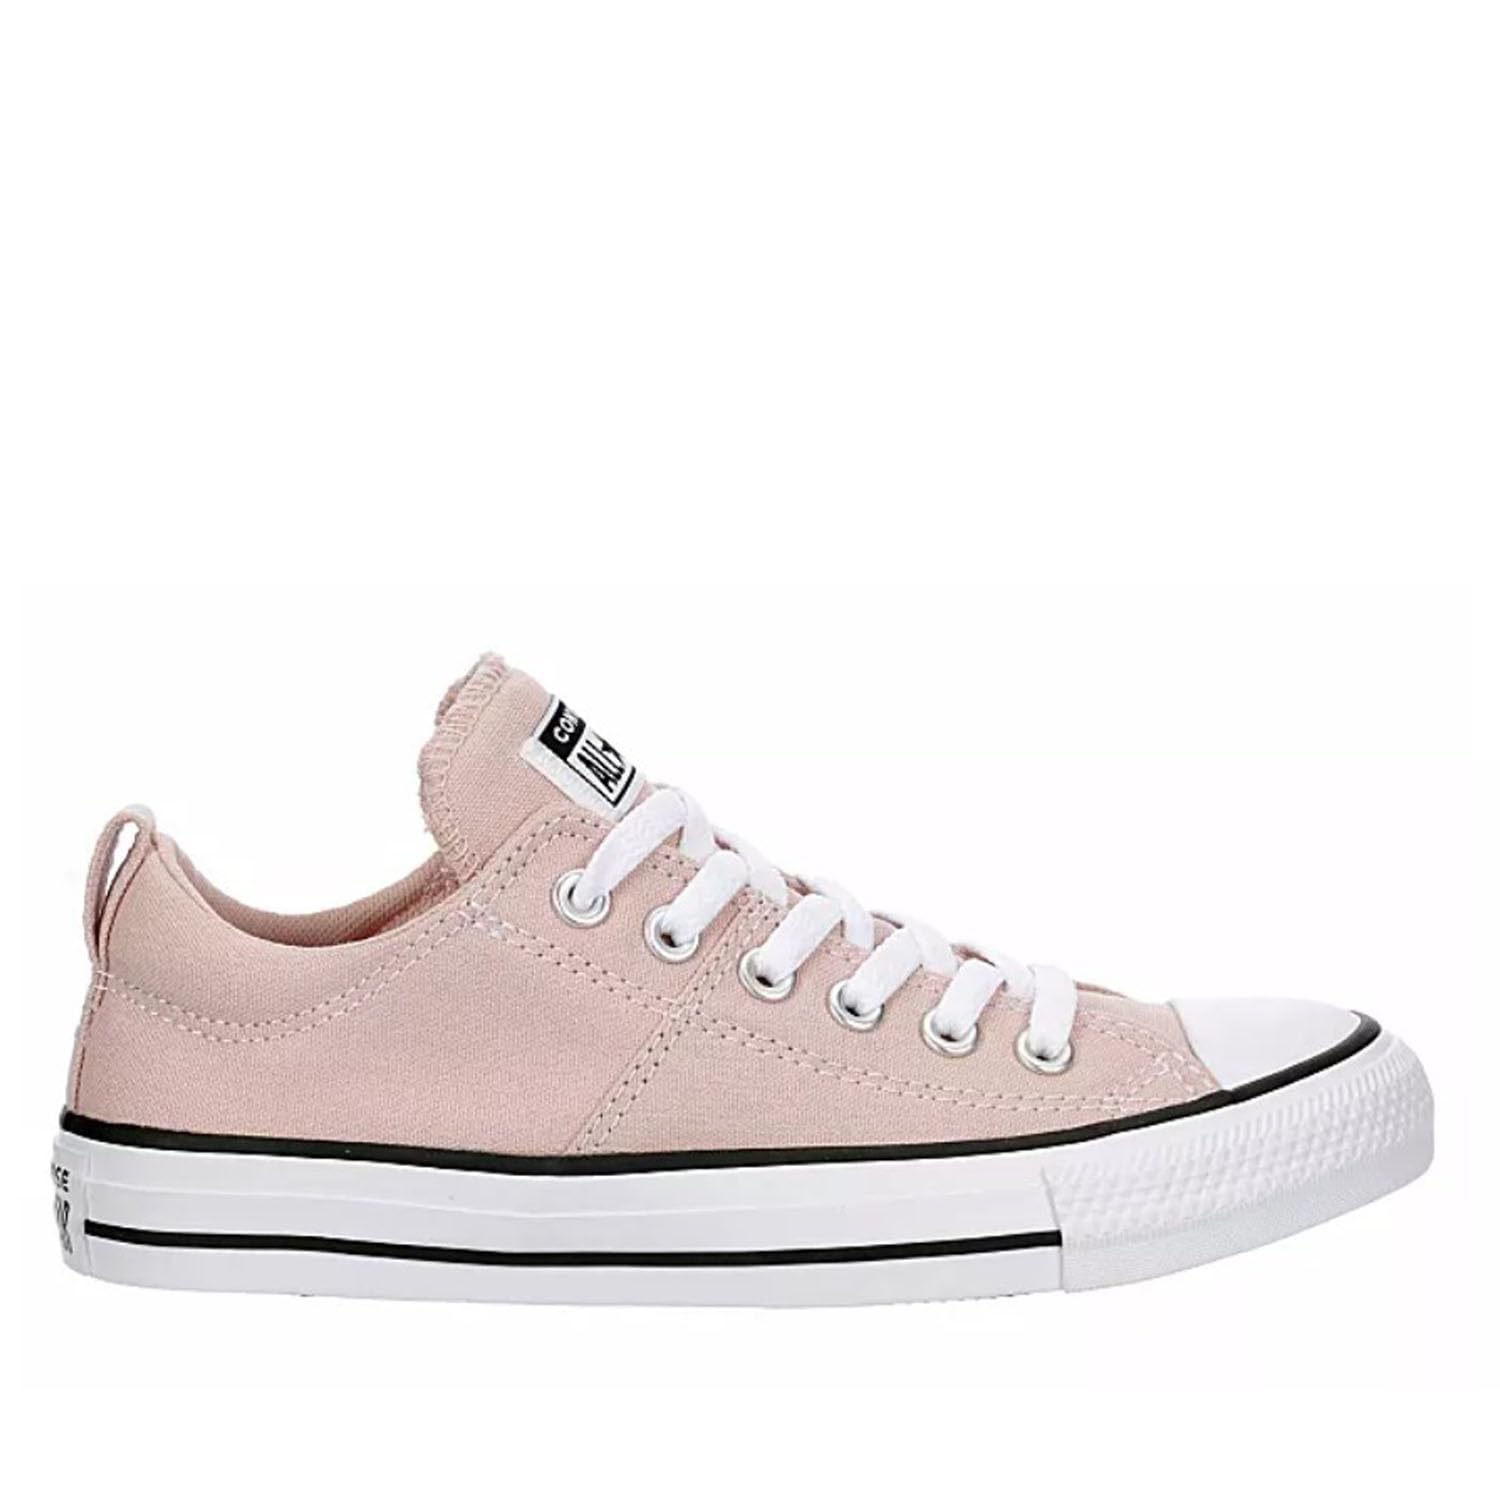 Converse Unisex Chuck Taylor All Star Madison Ox Canvas Sneaker - Lace up Closure Style - Pink Sage/White/Black